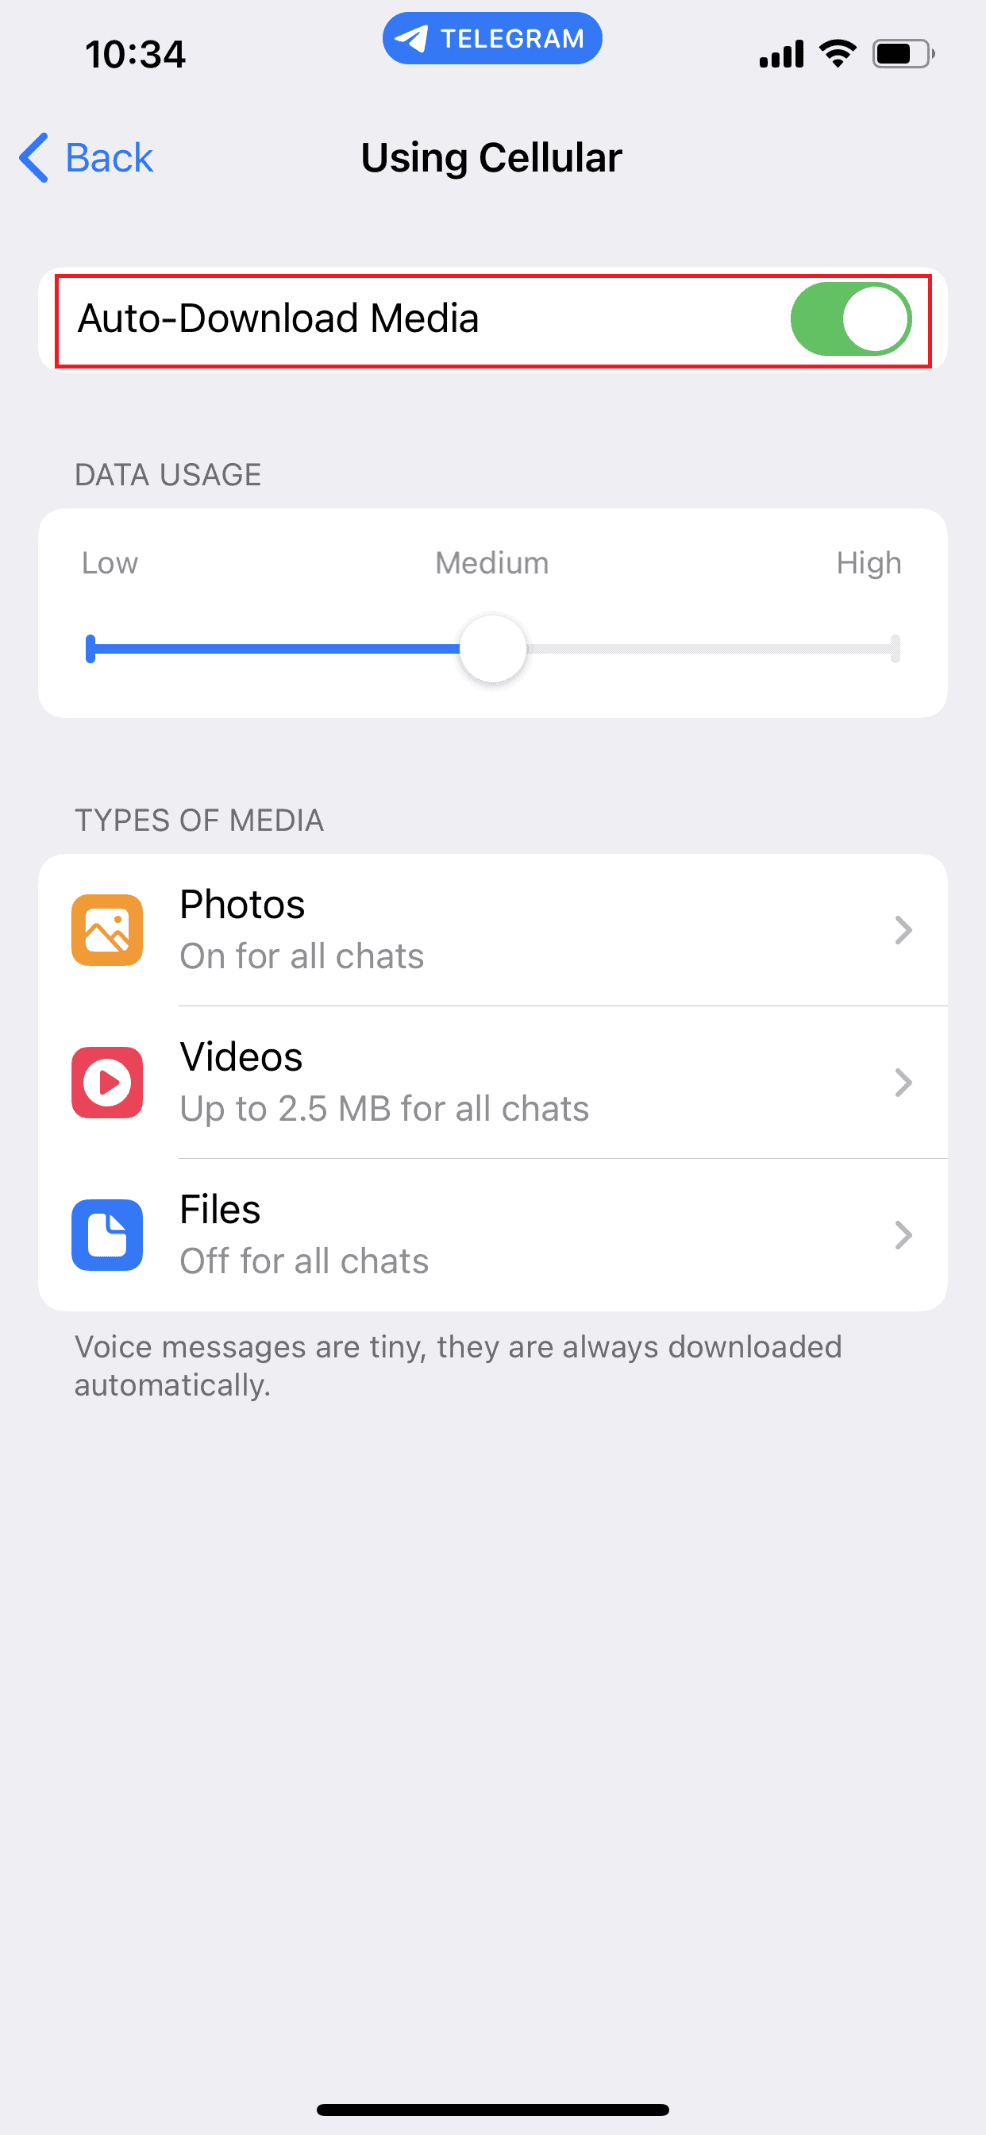 Tap one of the options and turn off Auto-Download Media toggle